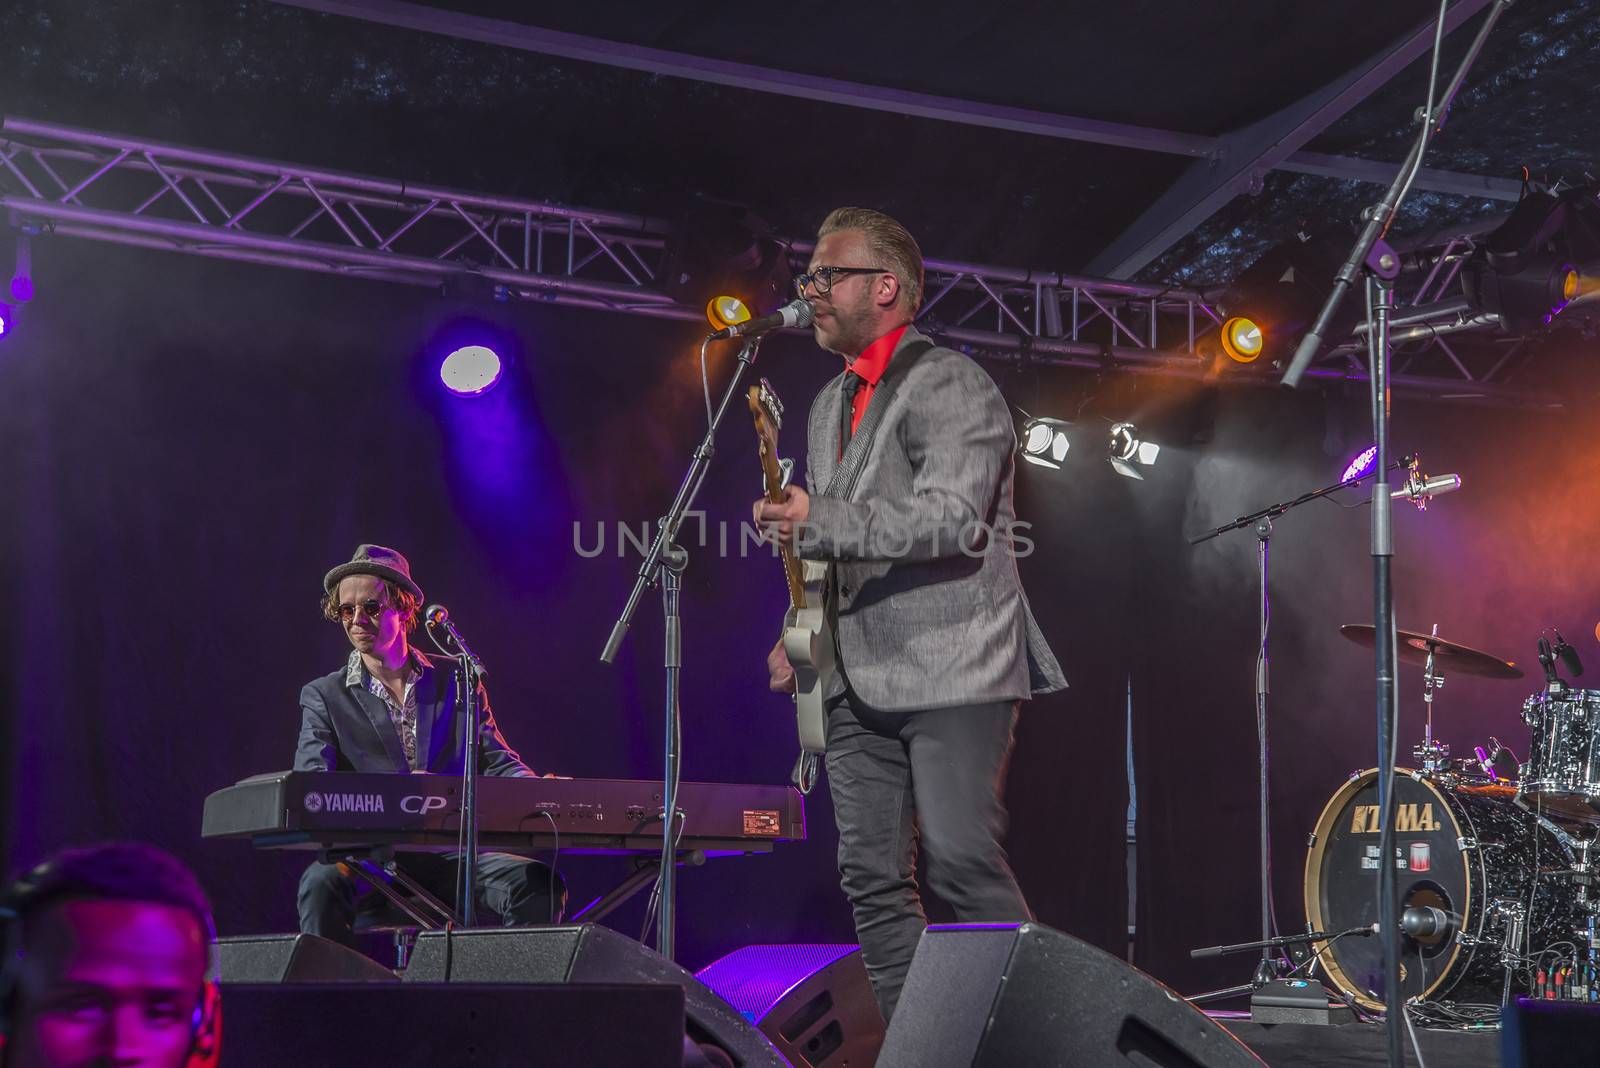 Each year the first week in August held a blues festival in Notodden, Norway. Photo is shot from the concert with a local band called: Little Andrew Band. The band members are: Vocals and guitar Andreas Stamnes (Little Andrew ), bass: Paul M.Dahl��, drums: Robert Skoglund, piano: Daniel T. R��ssing